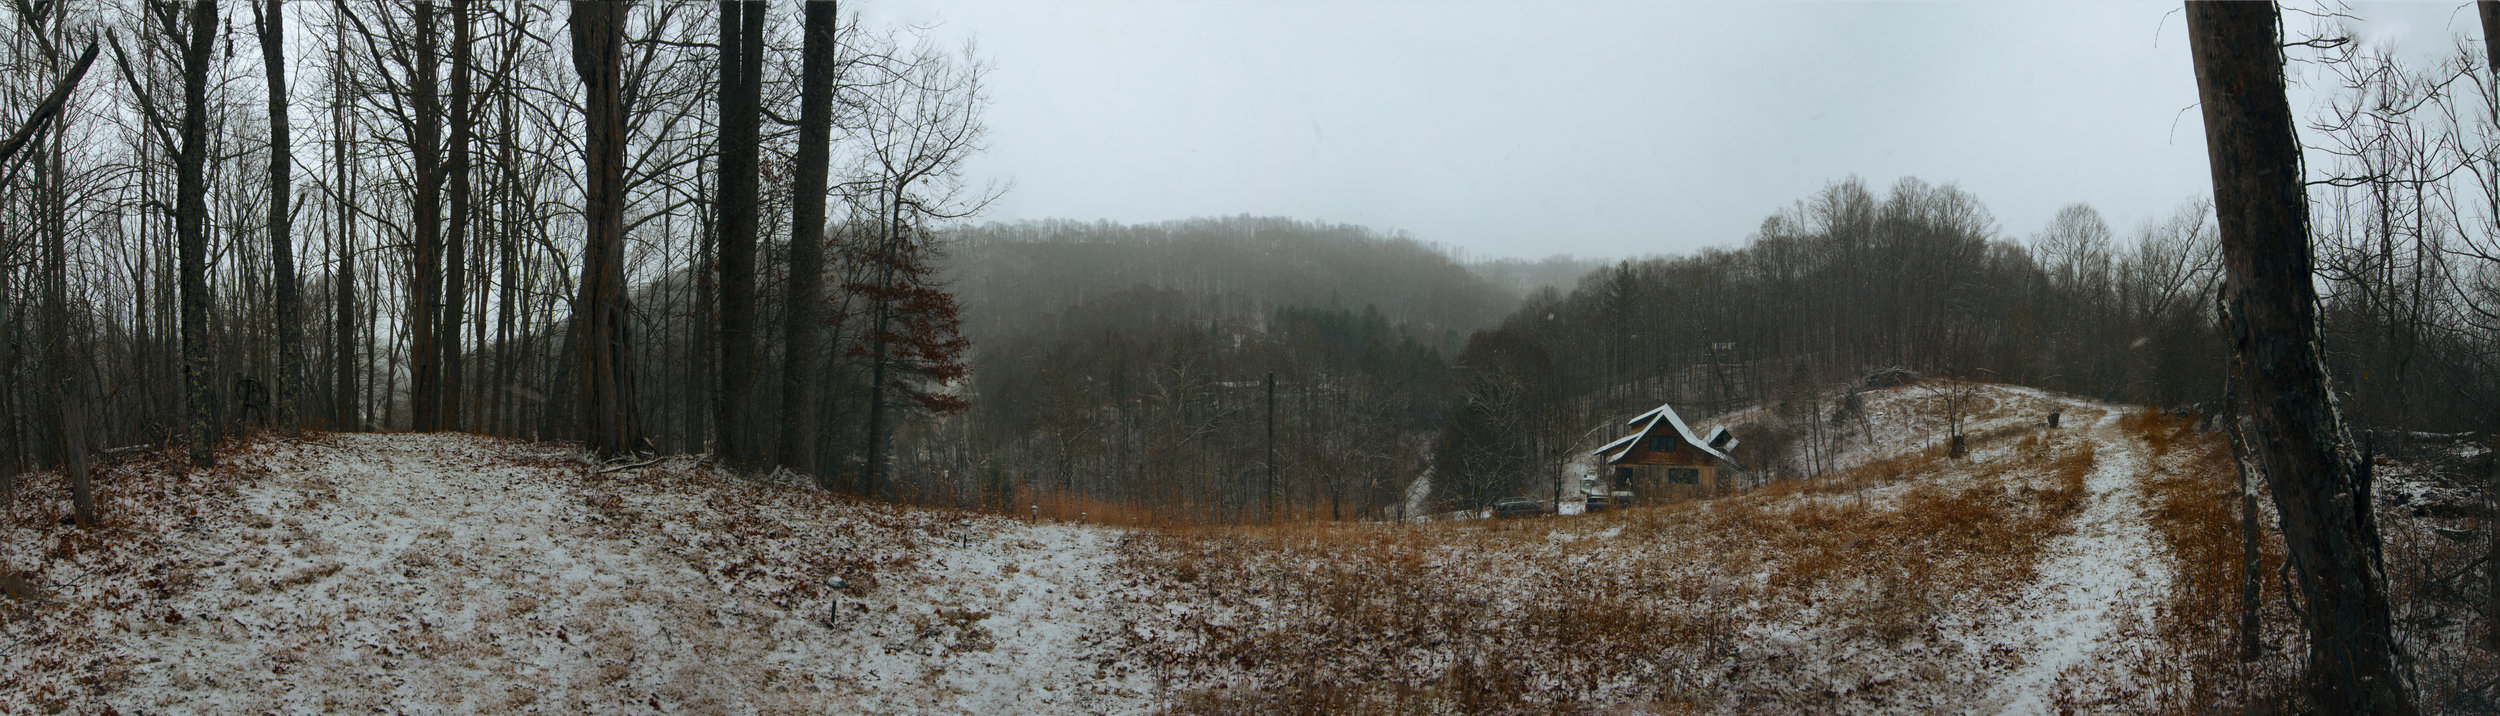  An exploration of the wintery landscape of Ashe County, NC 